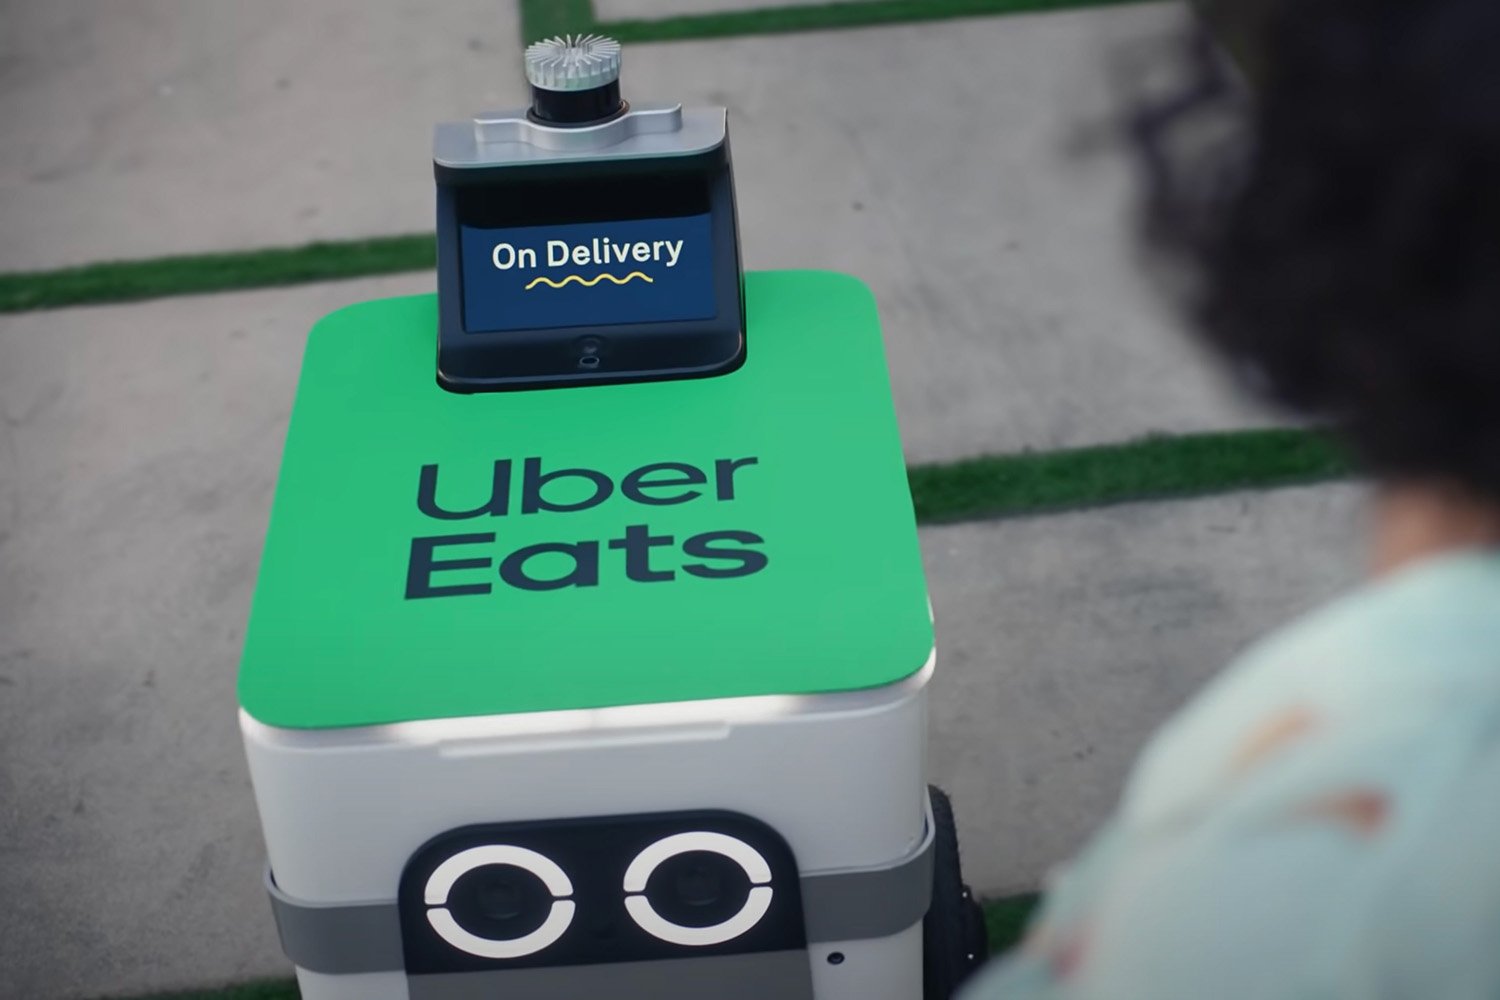 A food delivery robot's footage led to a criminal conviction in LA